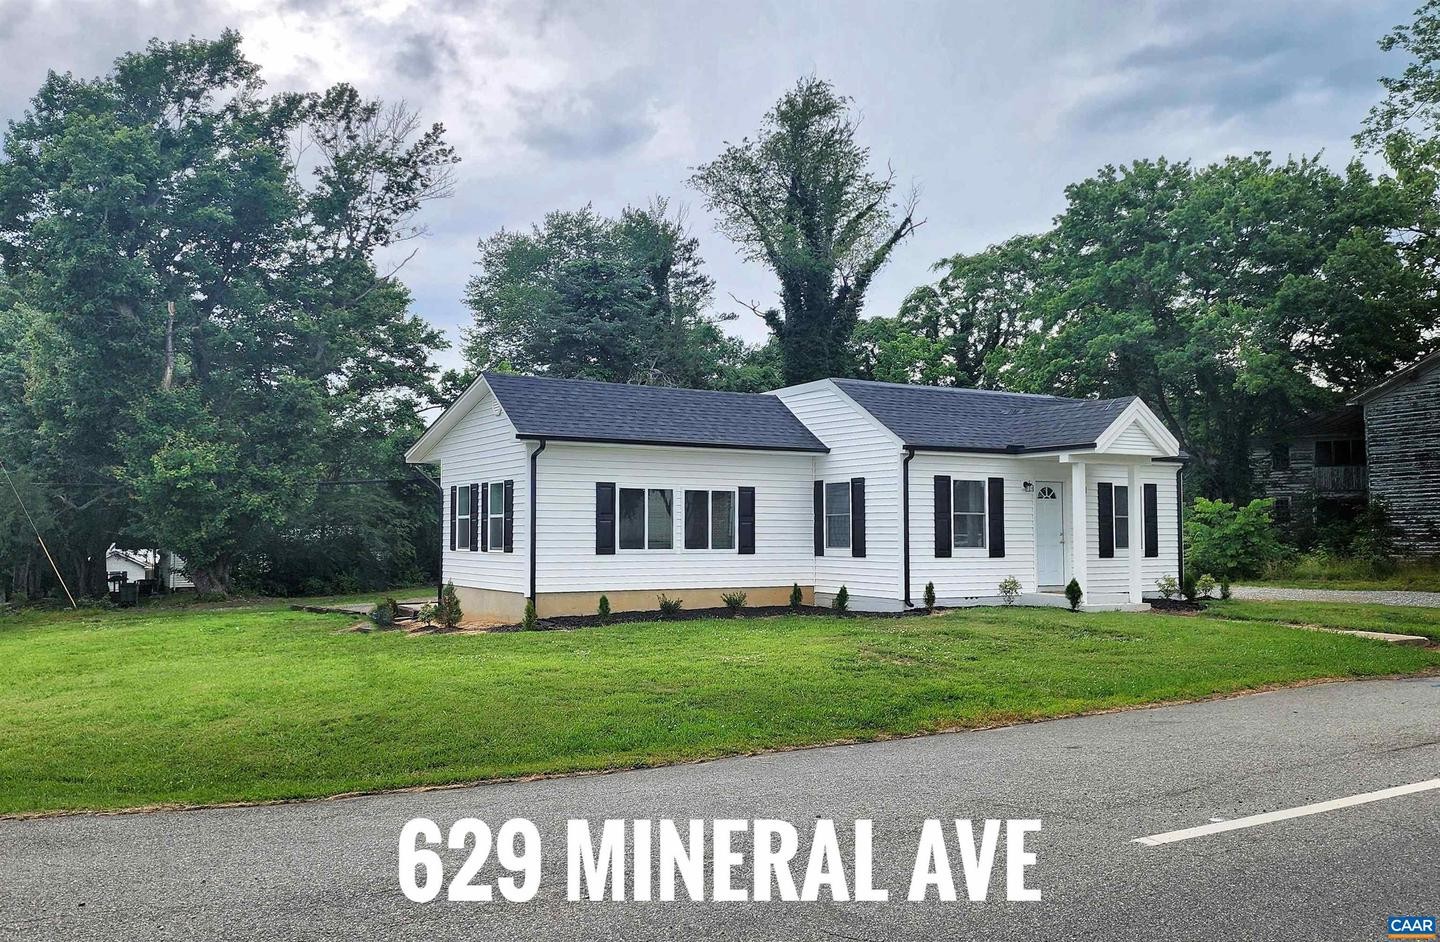 1. 629 Mineral Ave